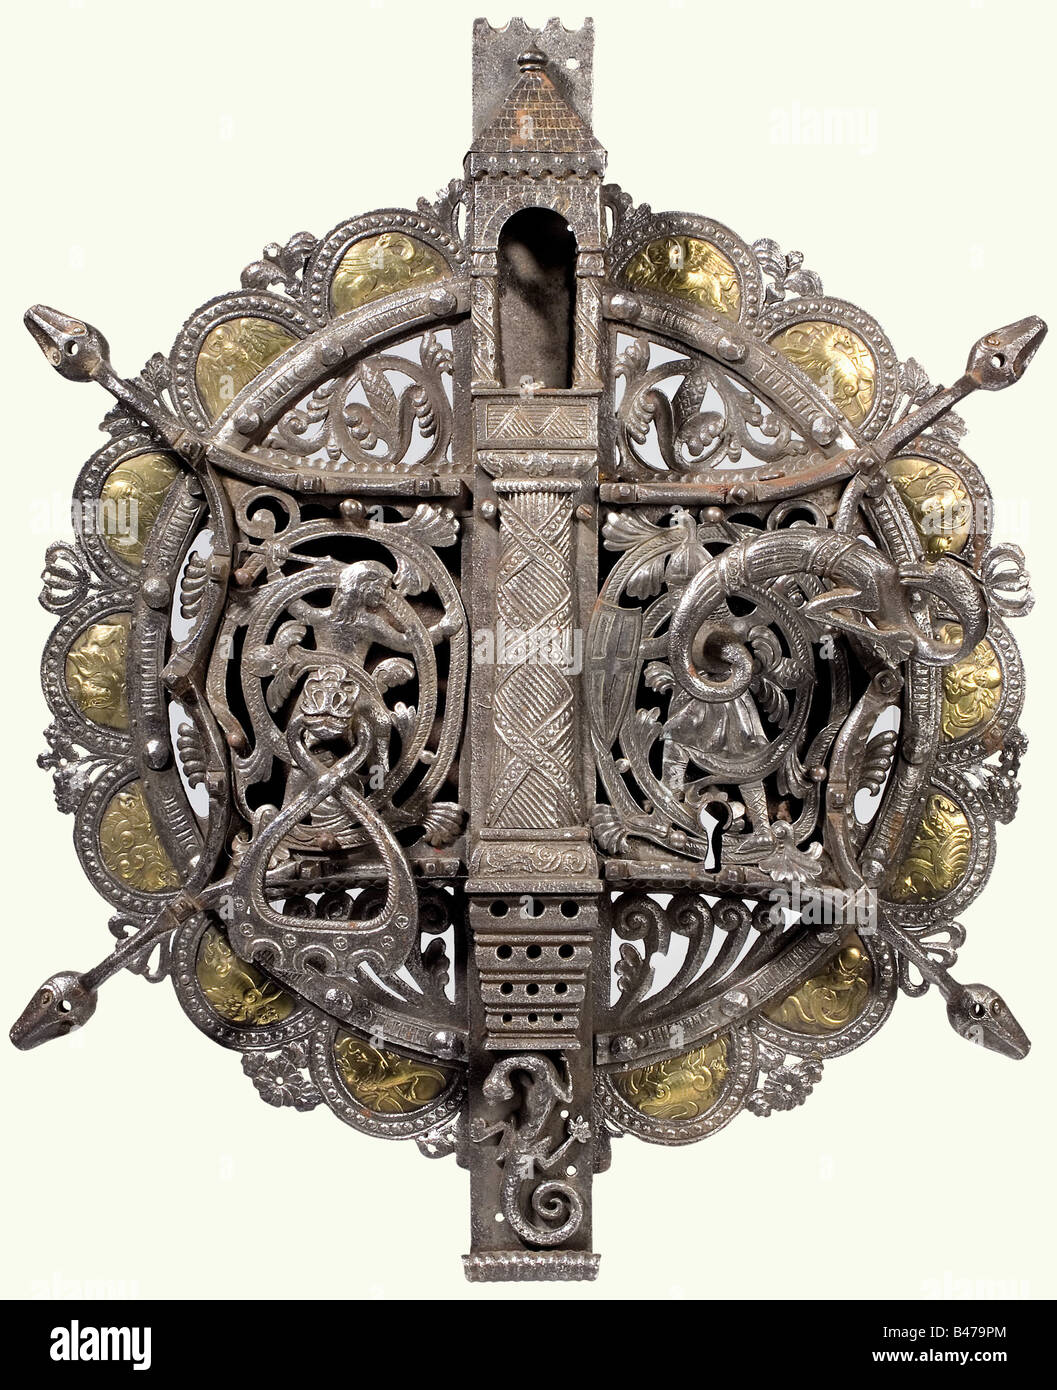 A large Viennese(?) gate lock, in the Roman style, circa 1900. Forged iron. Round, two-piece lock screen set with a rectangular lock case and a cover with decorative openwork figures. Narrow central raised section with an architectural top. Key missing. Handle is in the shape of a sculpted dragon. Movable tugging ring. Screen surrounded with inset embossed brass plates displaying evangelical symbols and fabulous animals. Richly chiselled ornamentation. Height 73 cm. historic, historical, 1900s, 20th century, 19th century, handicrafts, handcraft, craft, object, , Stock Photo